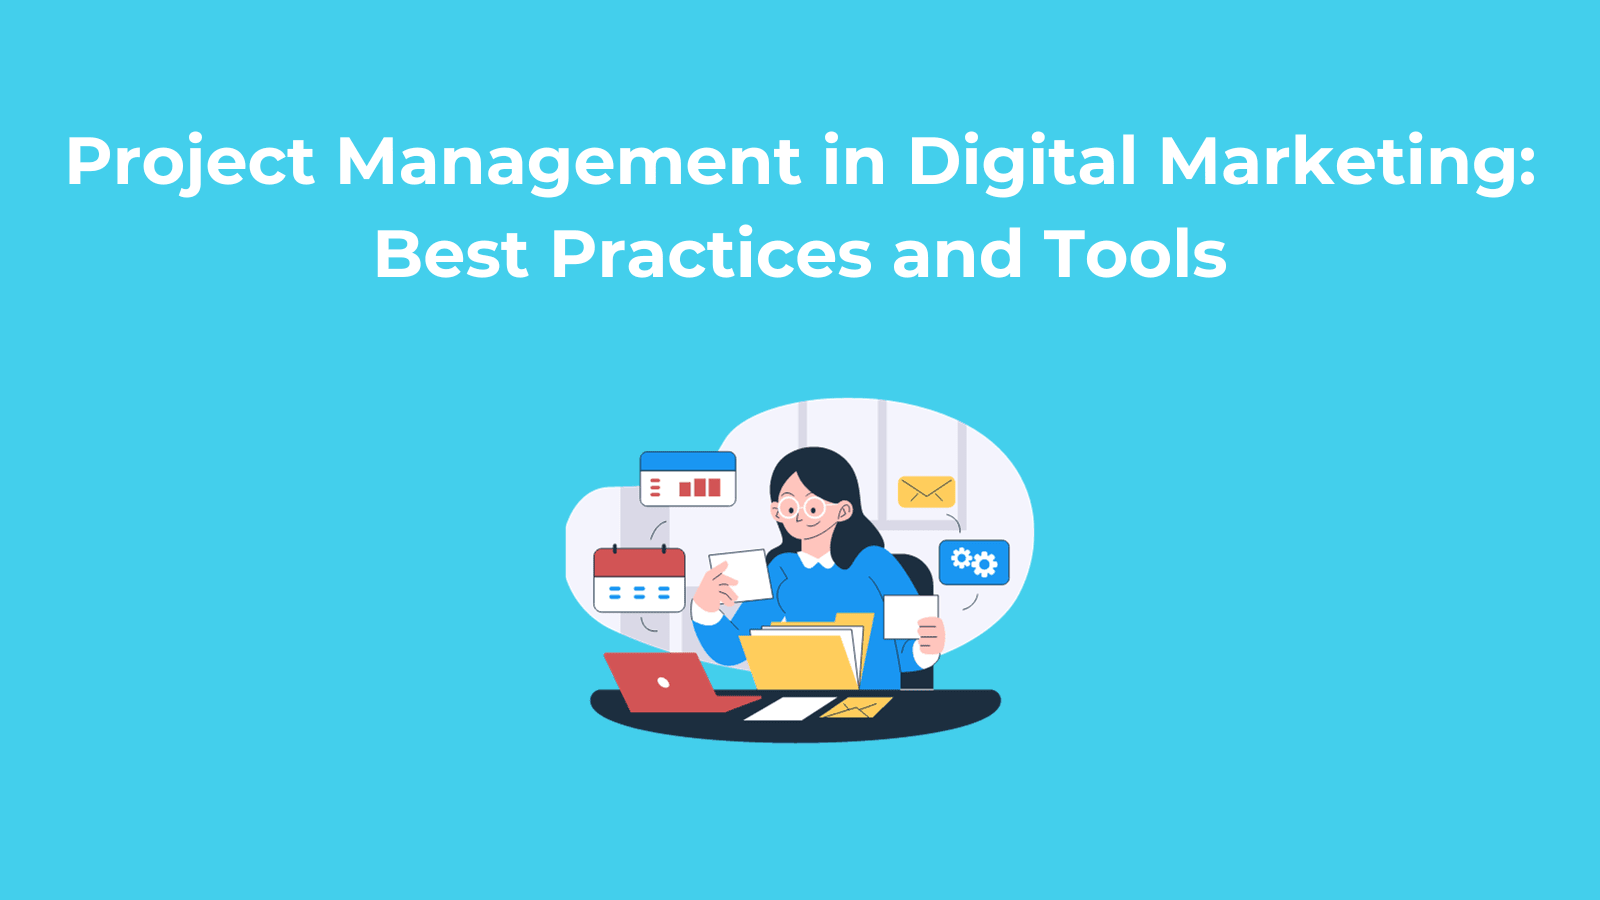 Project Management in Digital Marketing Best Practices and Tools